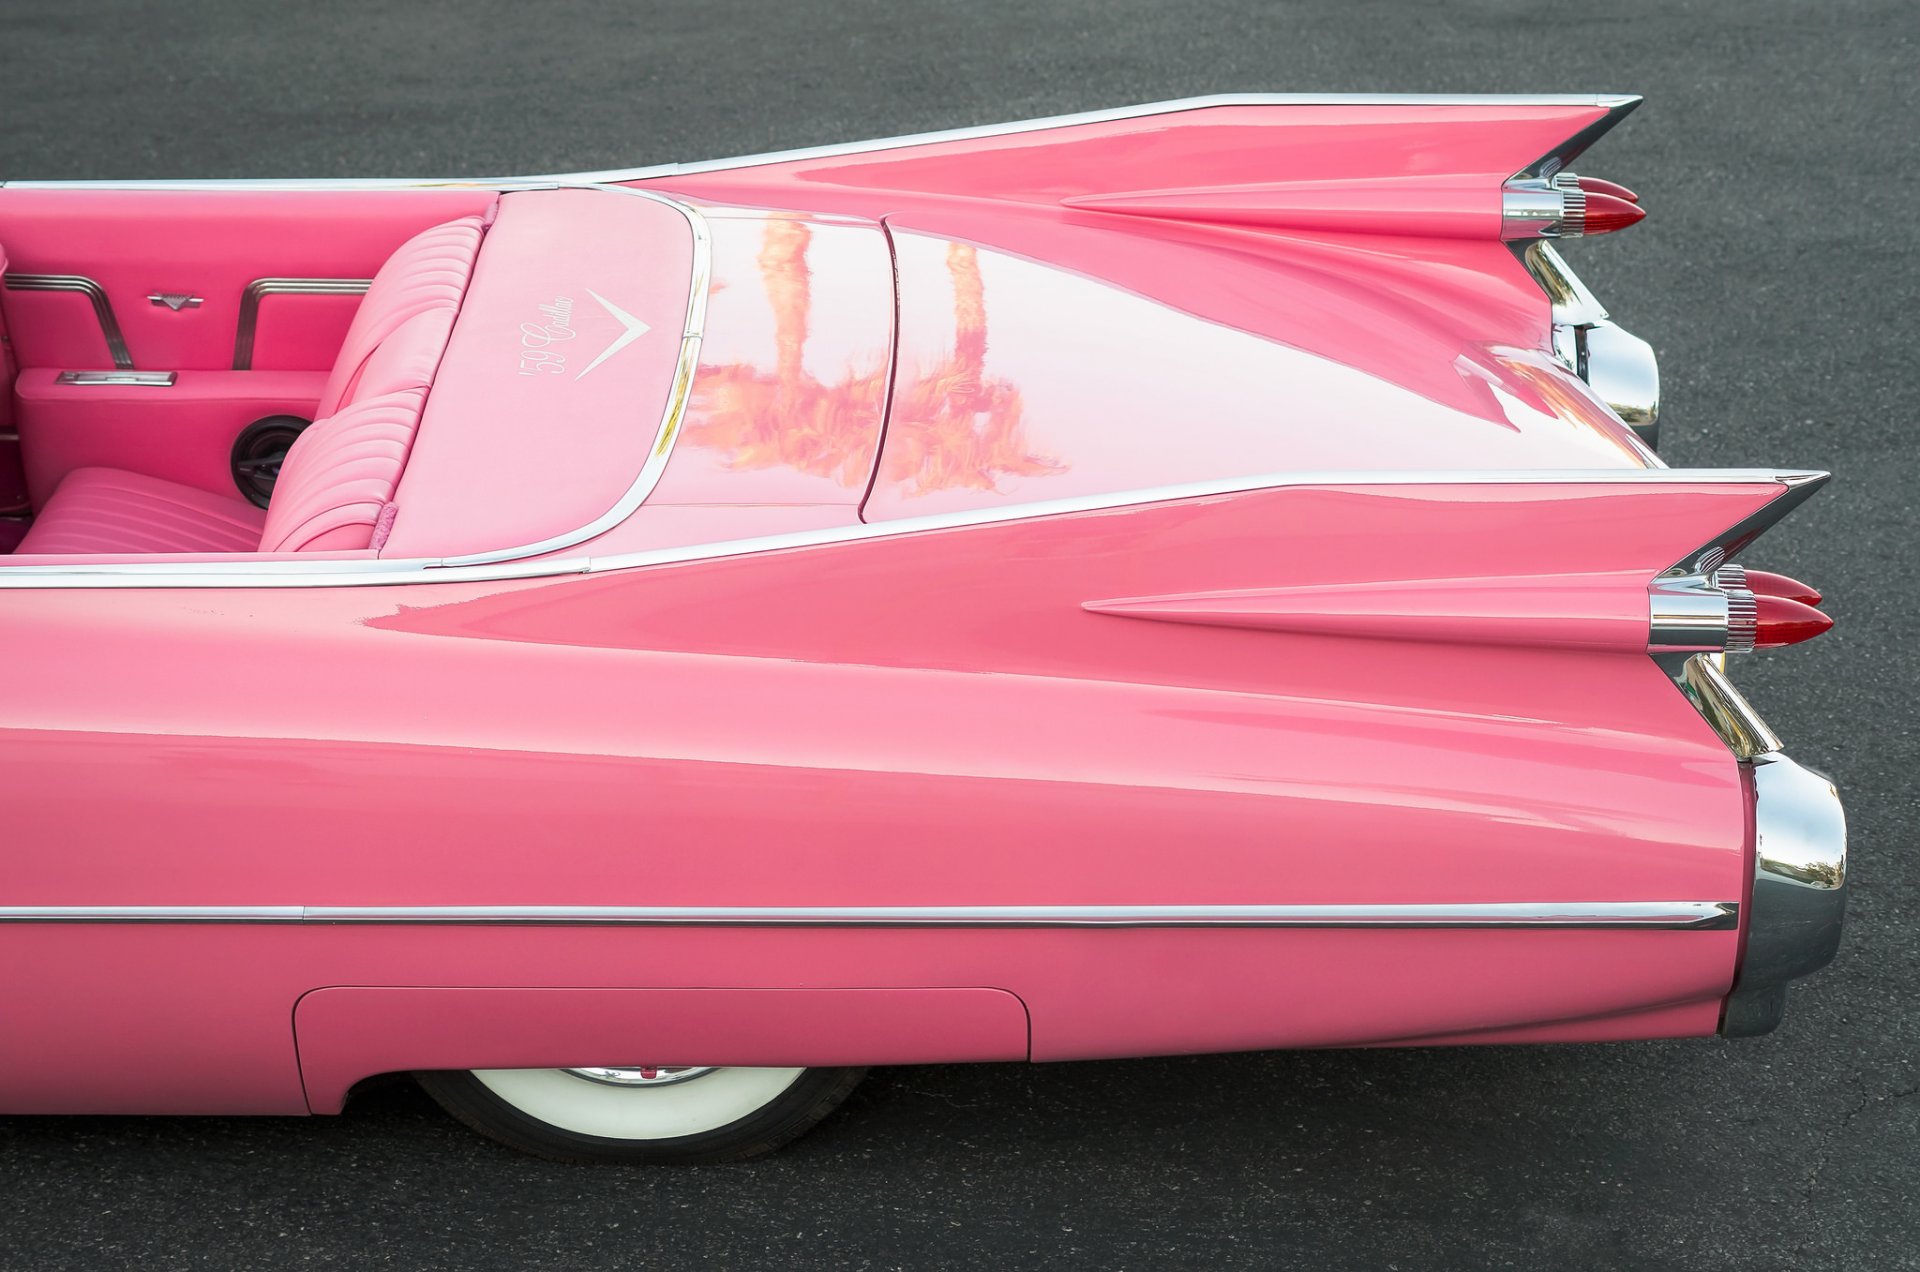 Side view of a pink convertible on the road.